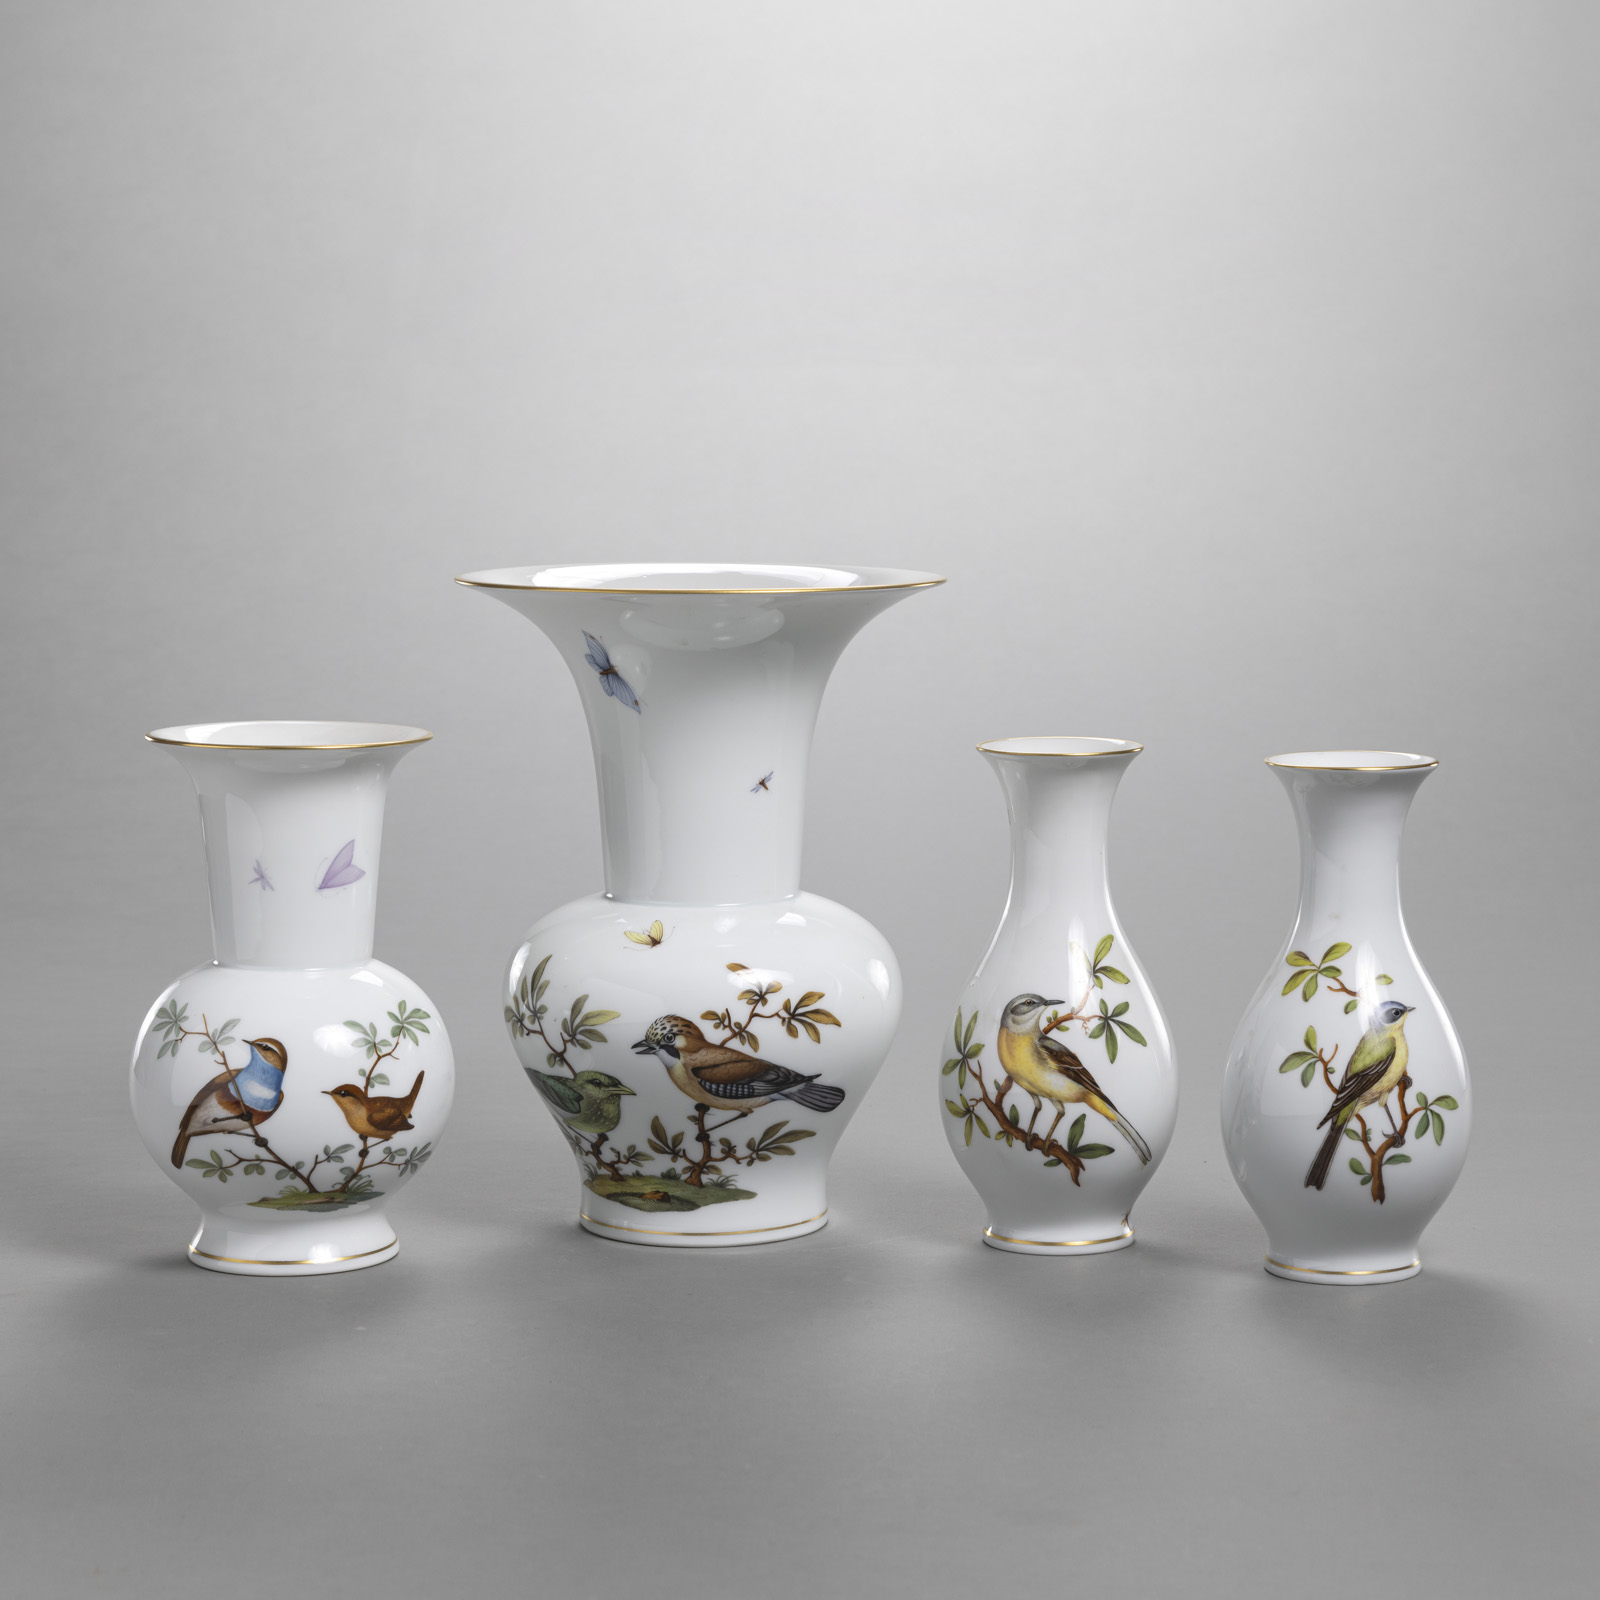 <b>FOUR BALUSTRE SHAPED ORNITOLOGICAL PATTERN VASES</b>